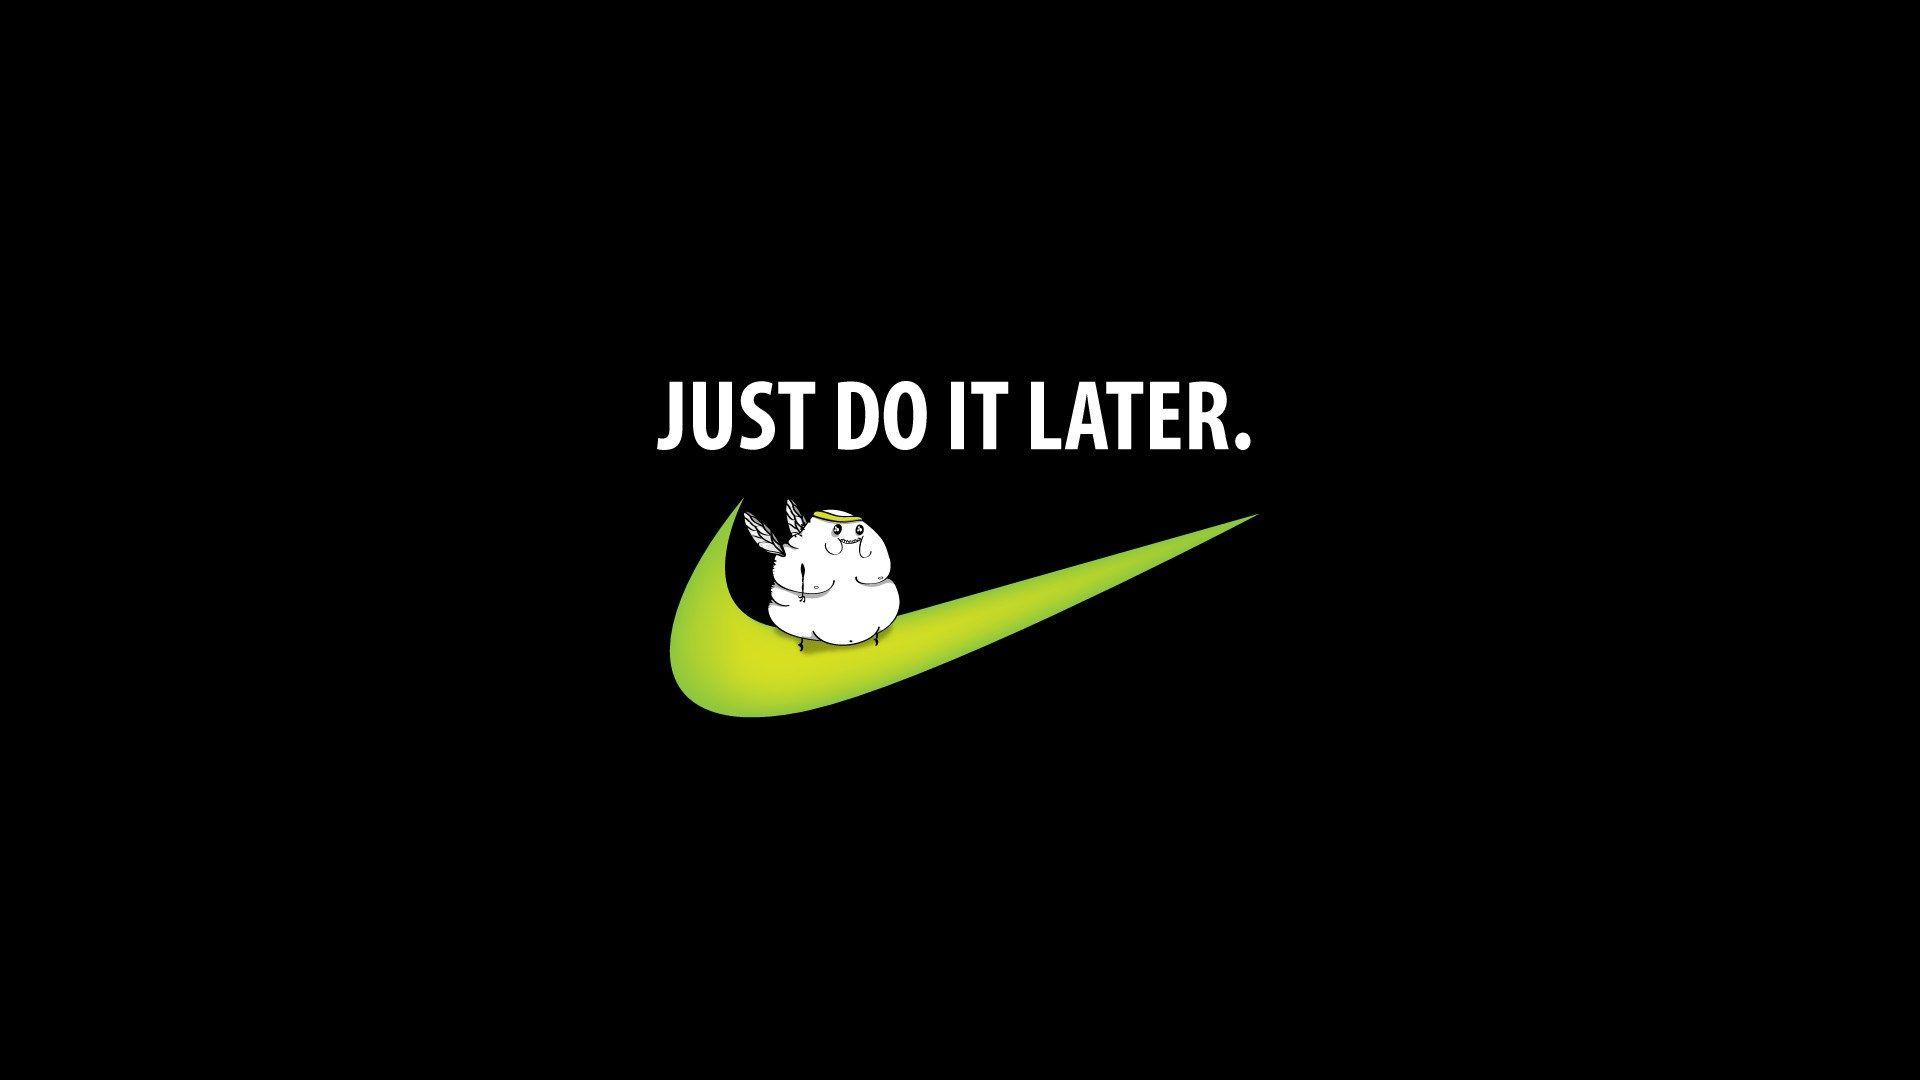 Nike Quotes Wallpaper (5). Nike wallpaper, Just do it